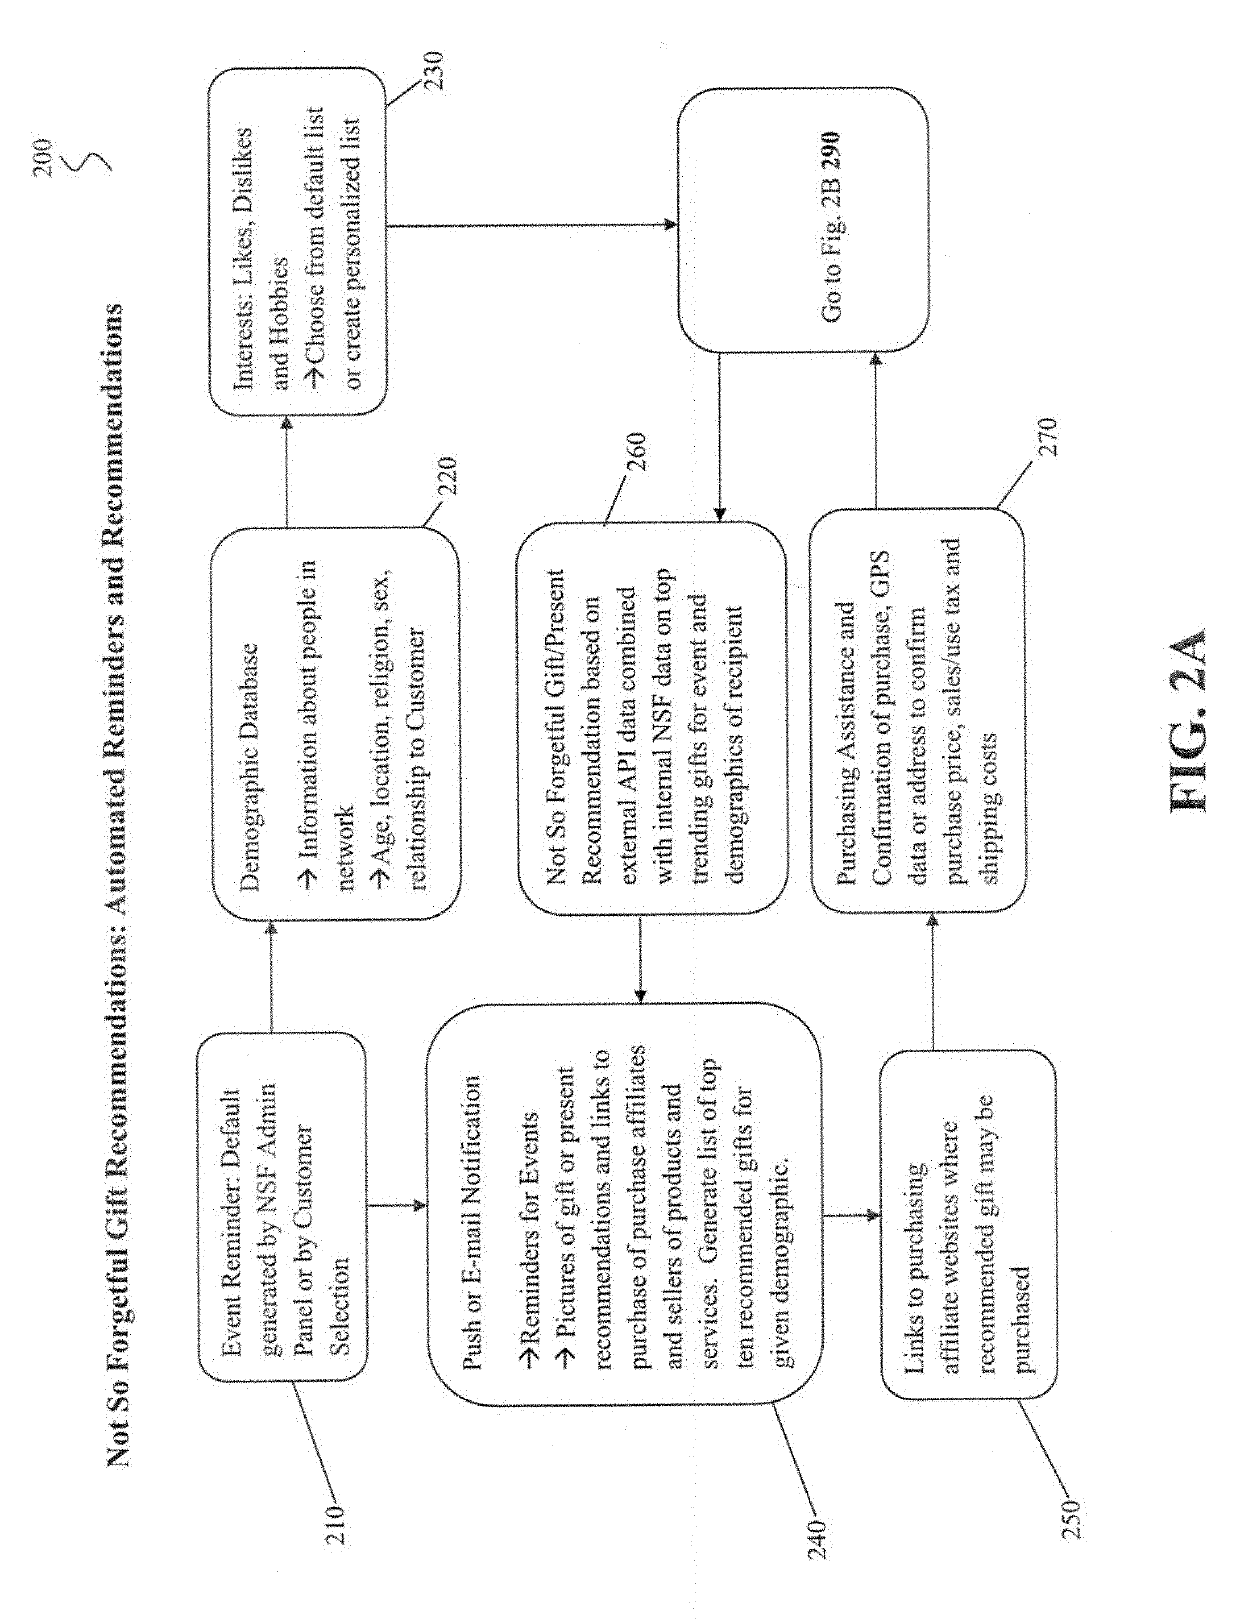 Apparatus and system for providing reminders and recommendations, storing personal information, memory assistance and facilitating related purchases through an interconnected social network